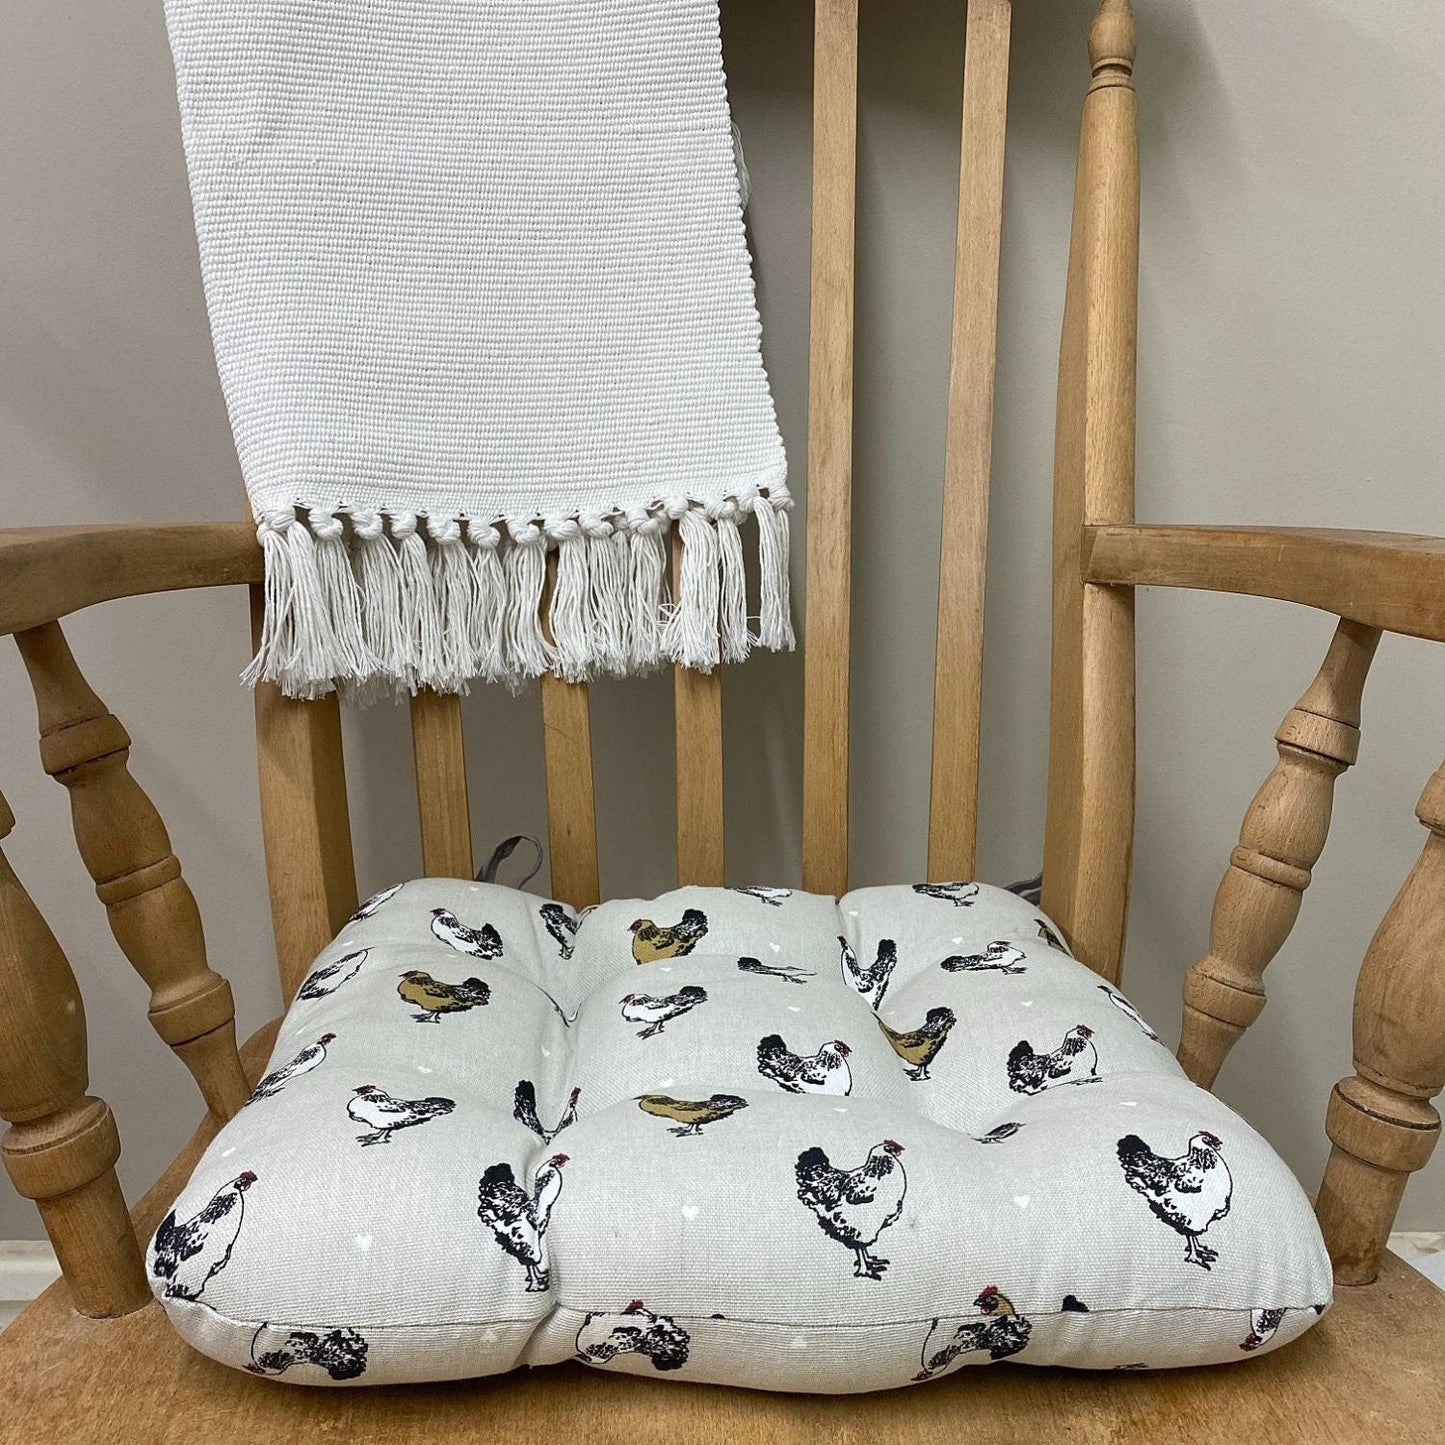 Padded Seat Pad With Ties With A Chicken Print Design - Ashton and Finch